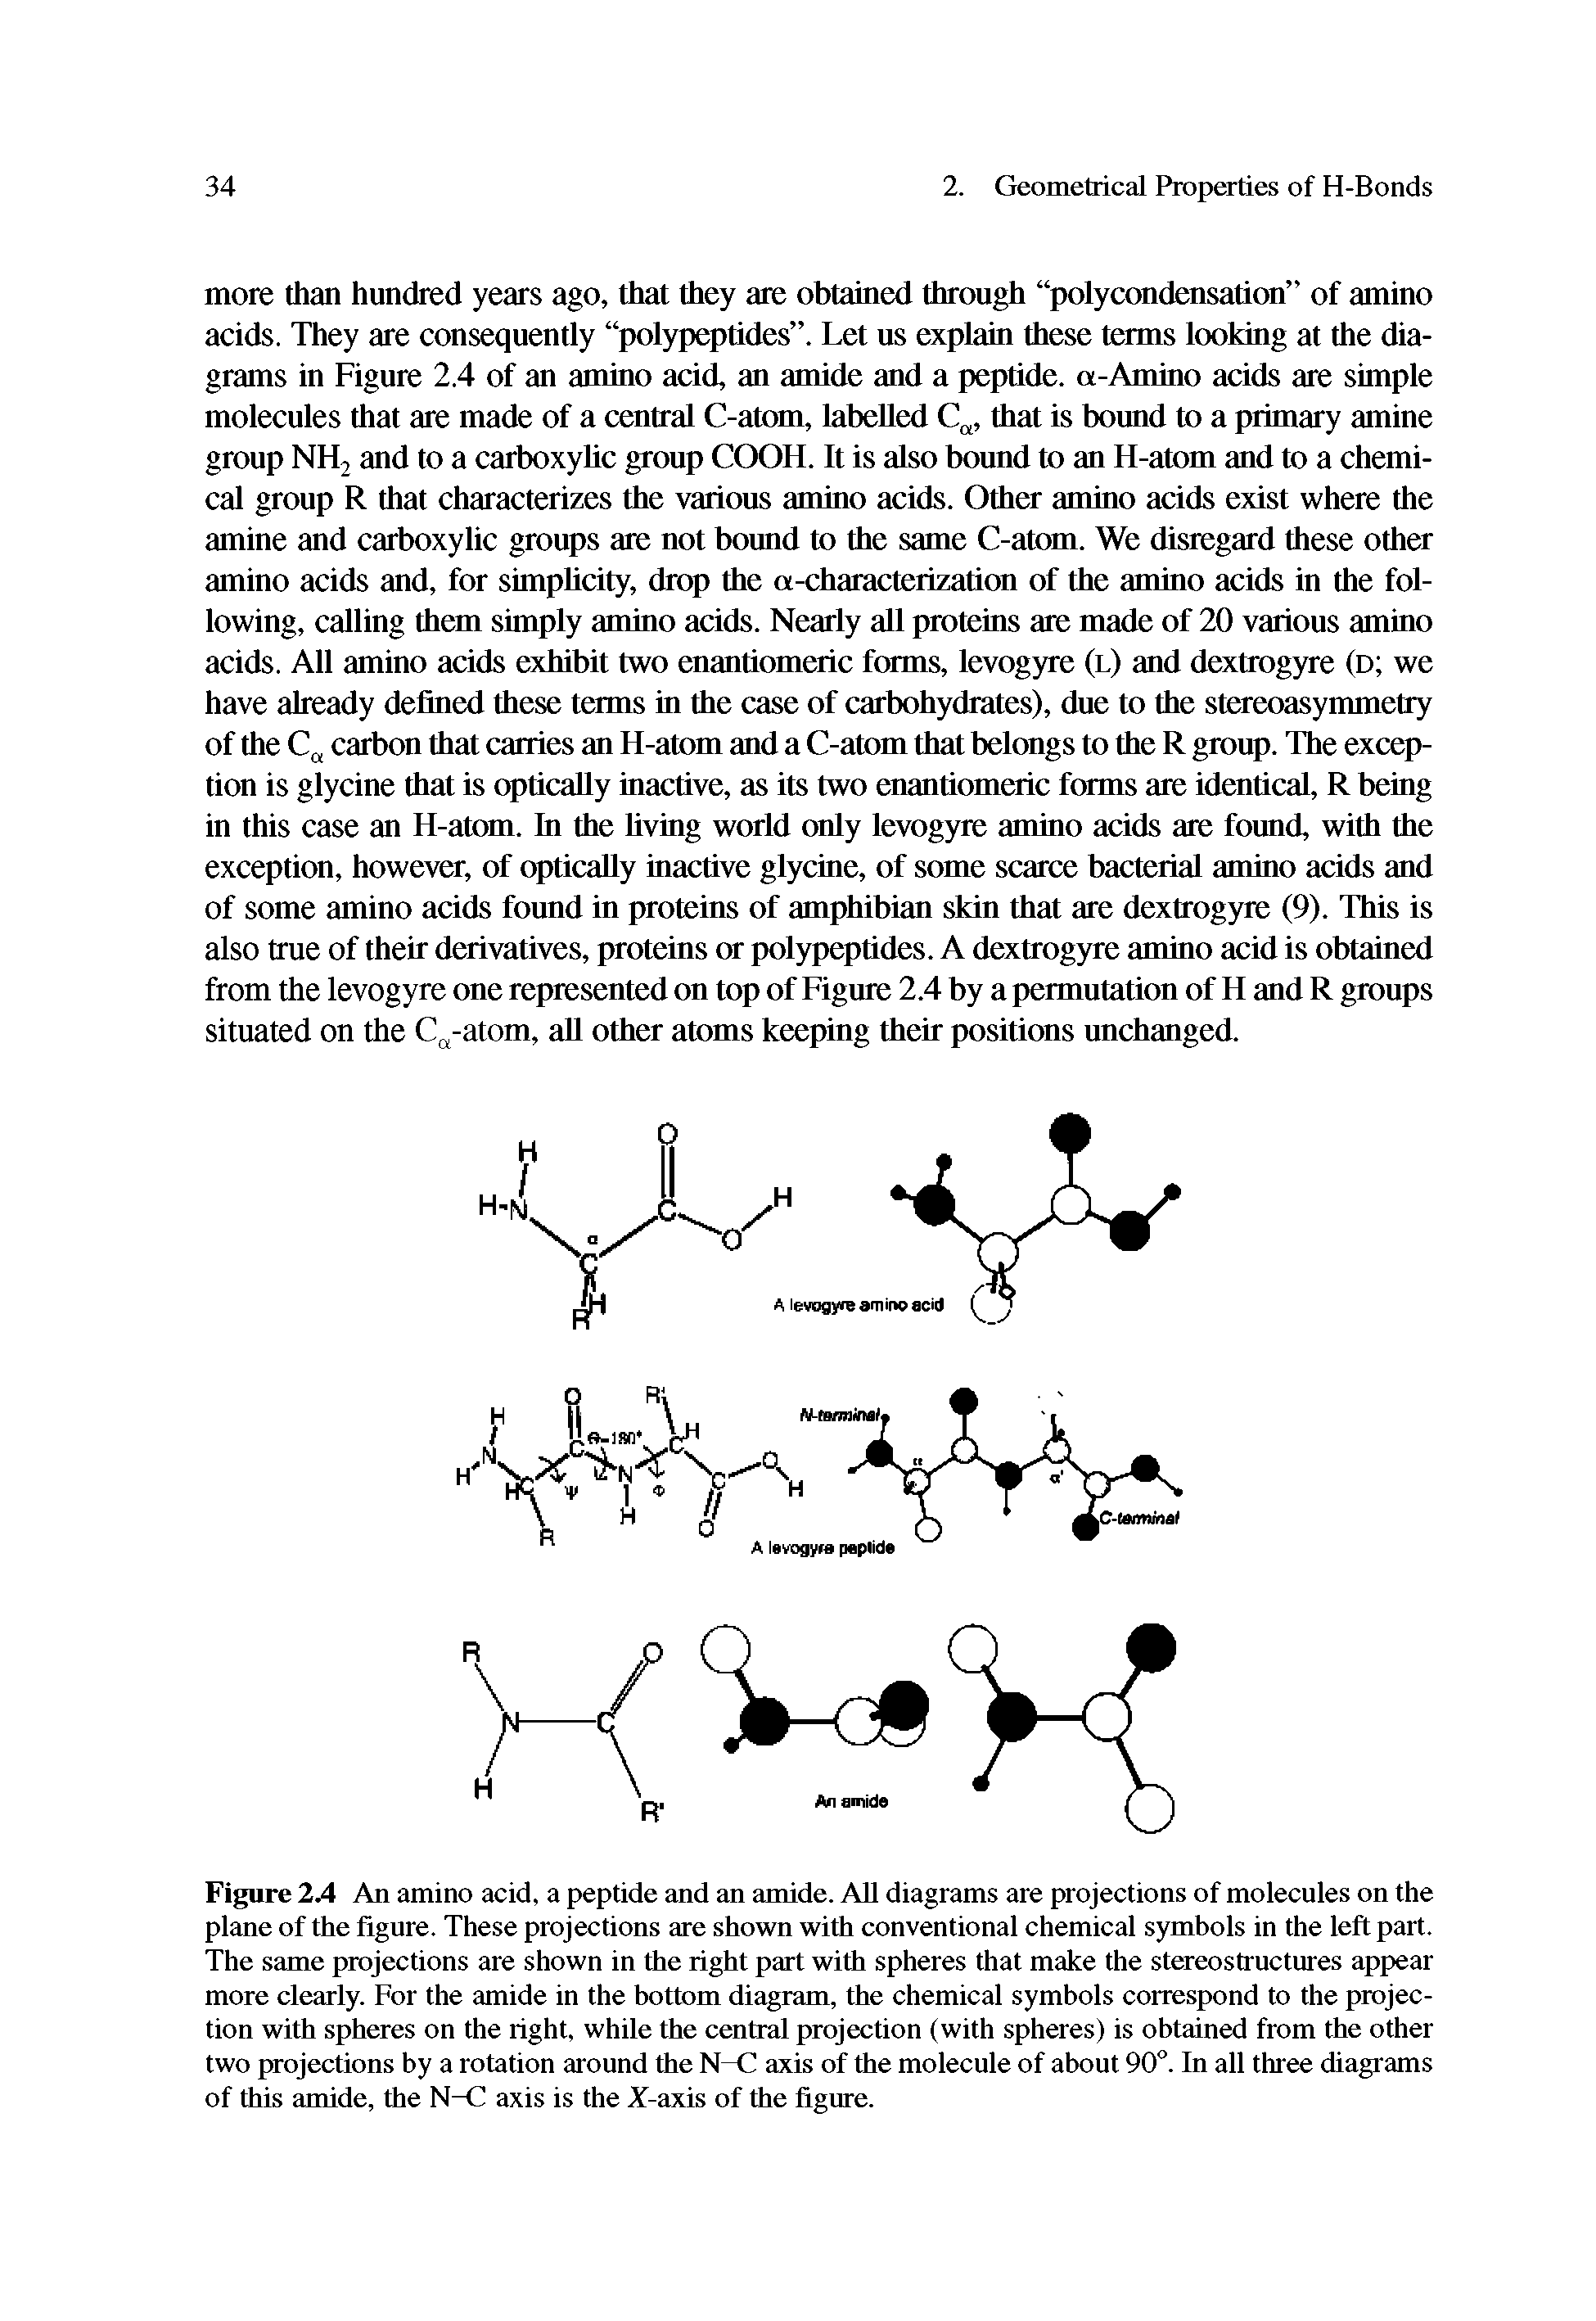 Figure 2A An amino acid, a peptide and an amide. AU diagrams are projections of molecules on the plane of the figure. These projections are shown with conventional chemical symbols in the left part. The same projections are shown in the right part with spheres that make the stereostructures appear more clearly. For the amide in the bottom diagram, the chemical symbols correspond to the projection with spheres on the right, while the central projection (with spheres) is obtained from the other two projections by a rotation around the N-C axis of the molecule of about 90°. In all three diagi ams of this amide, the N-C axis is the A-axis of the figure.